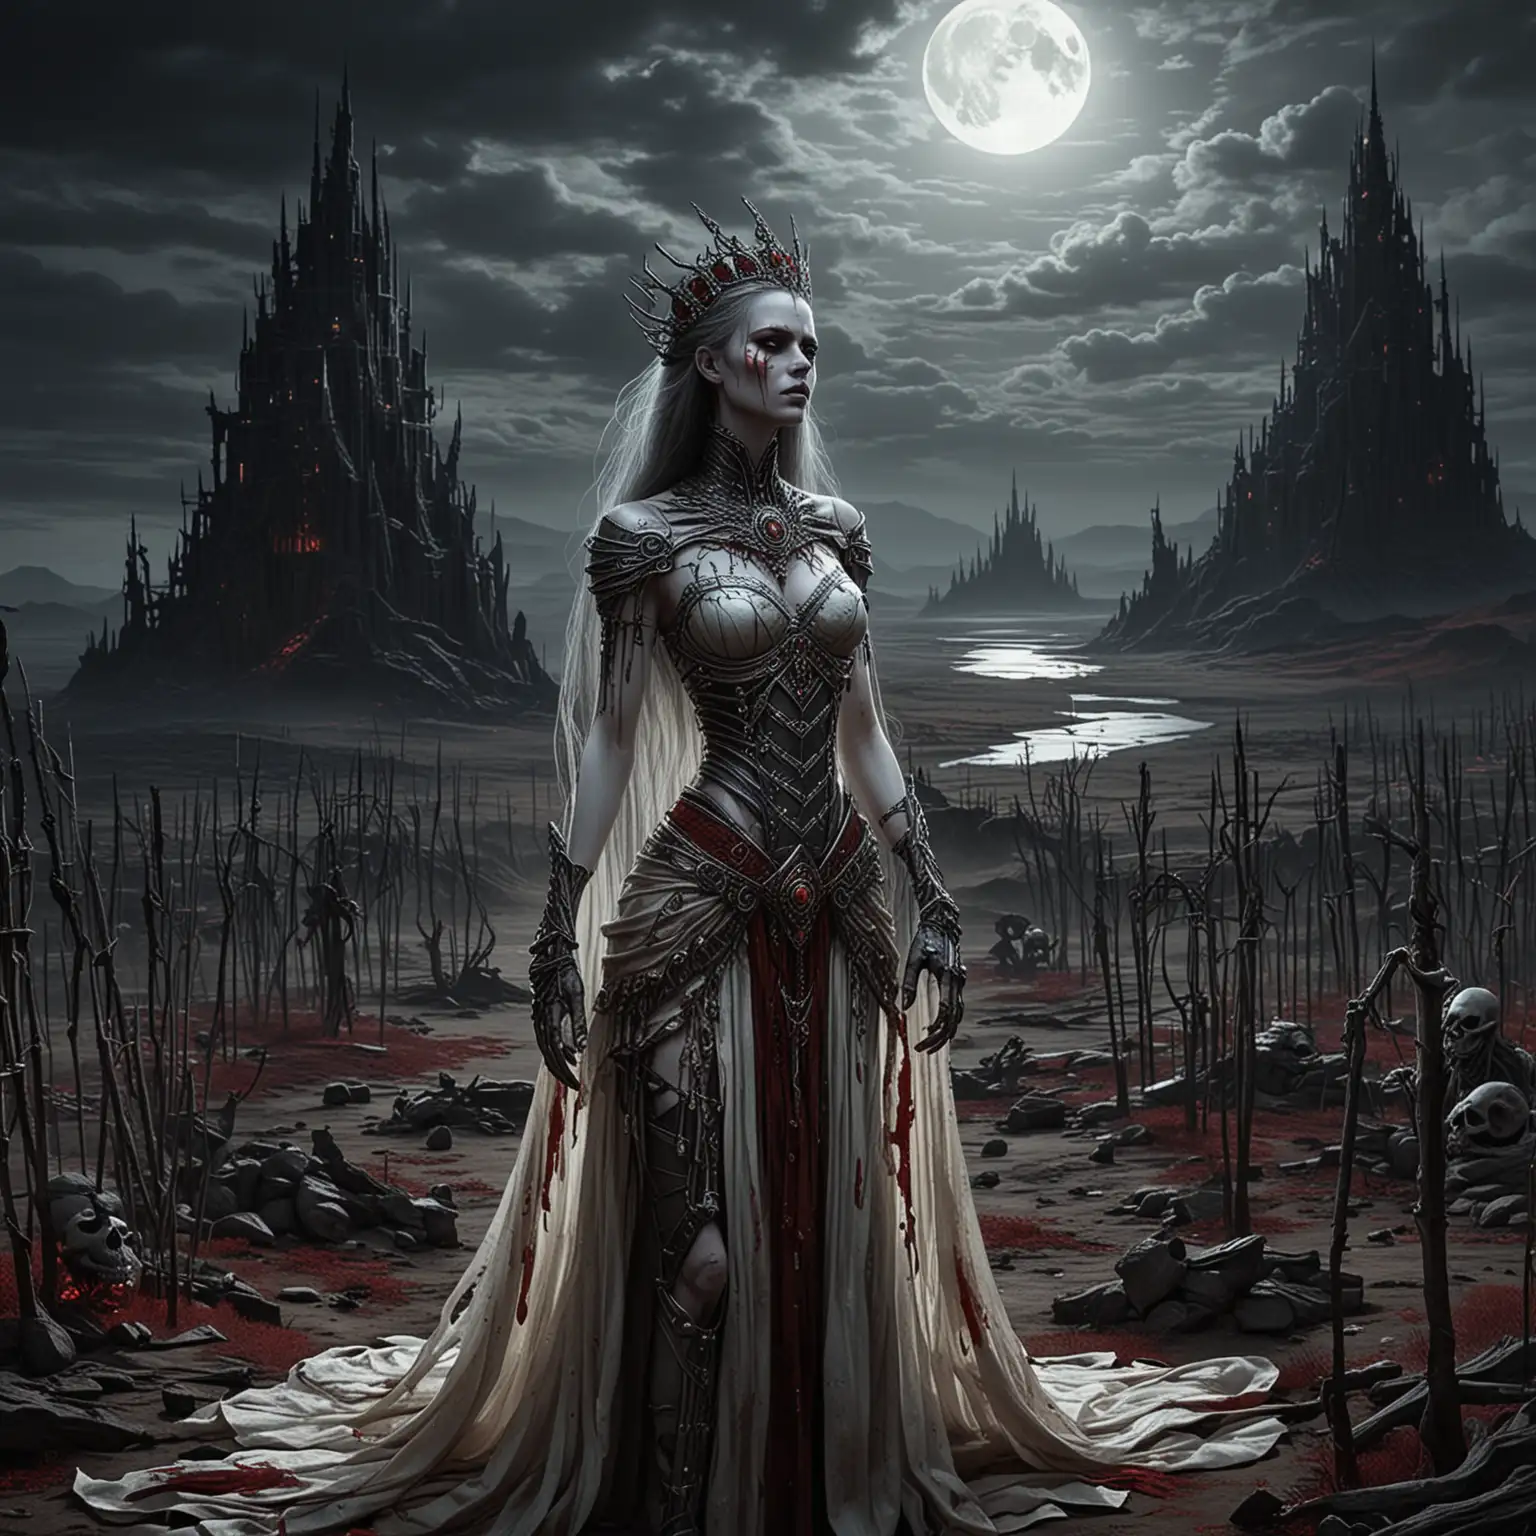 Empress Sanguina stands atop a dais of bone and sinew, her pale skin luminous in the moonlight as she surveys the twisted landscape spread out before her. Skeletal minions stand at attention, their empty eye sockets fixed upon their mistress with unwavering loyalty, while rivers of blood flow like crimson ribbons through the desolate wasteland, staining the earth with the mark of her dark dominion.